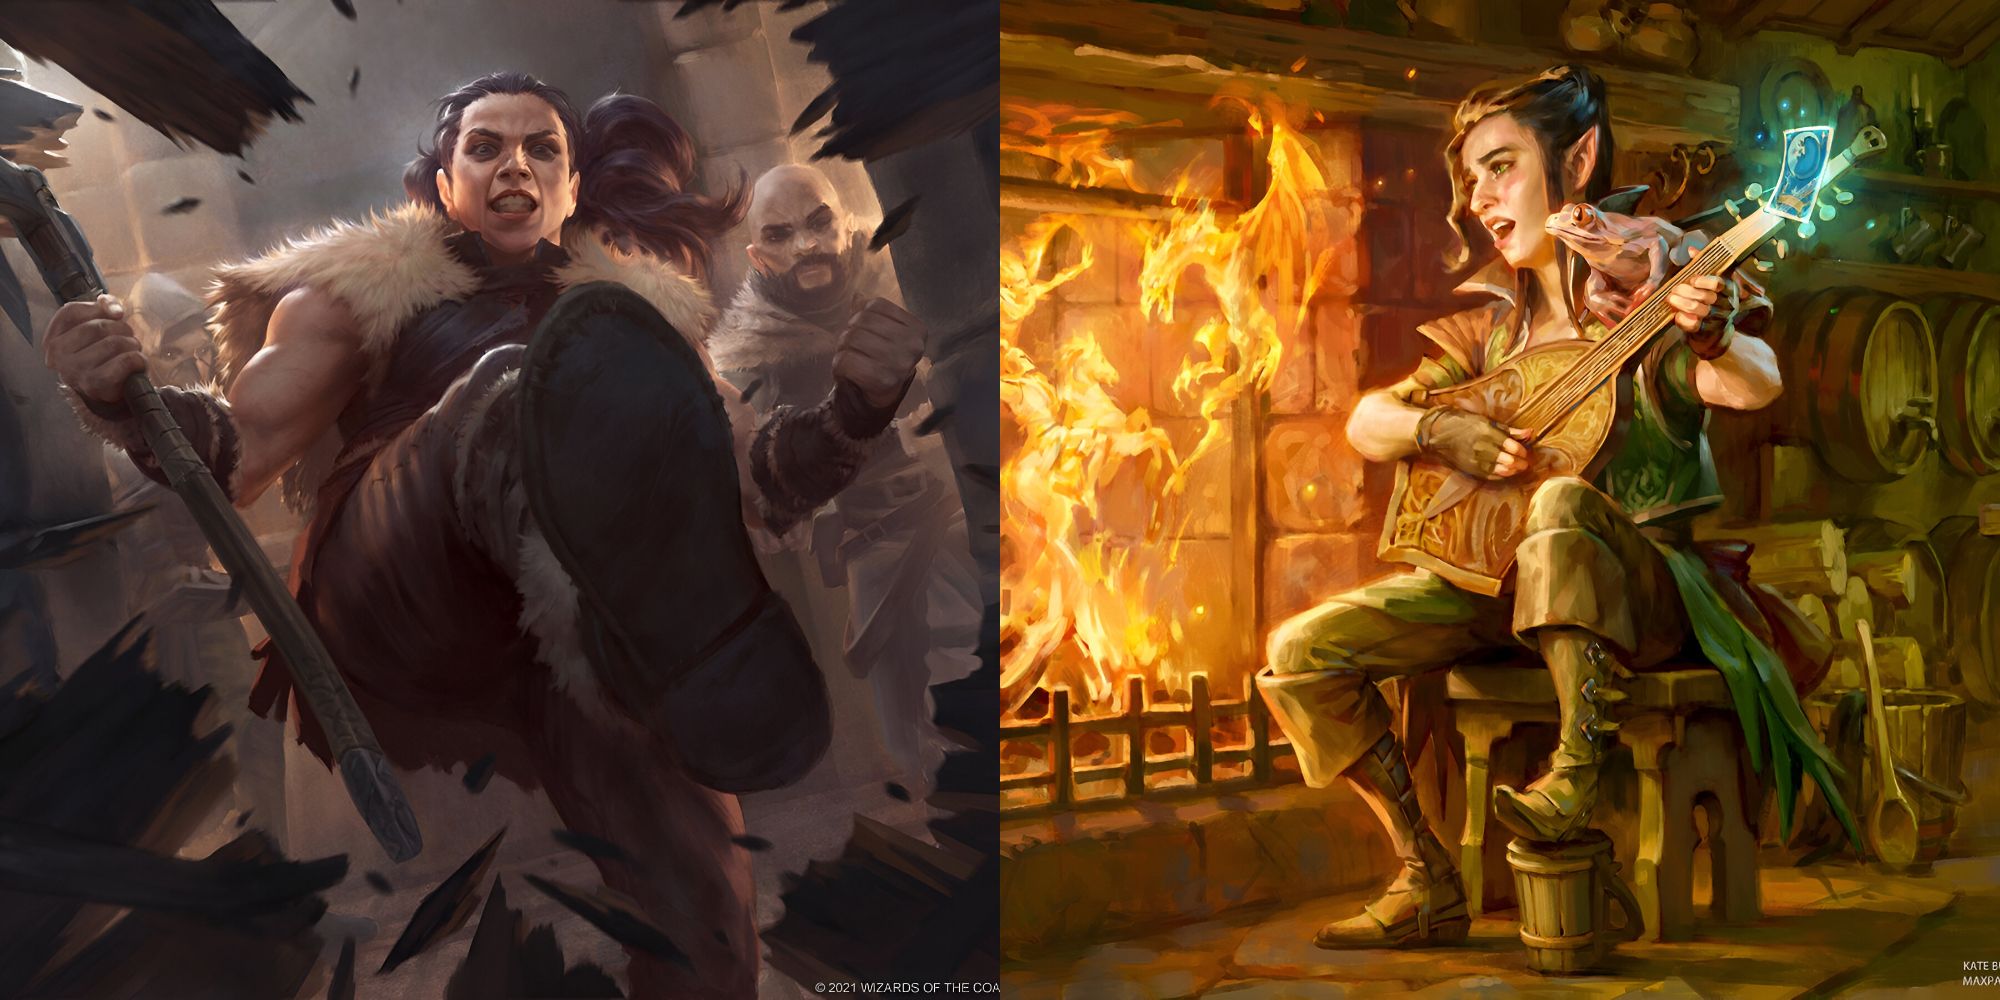 Left: A character kicking in a door. Right: A bard playing a lute by an tavern's fire